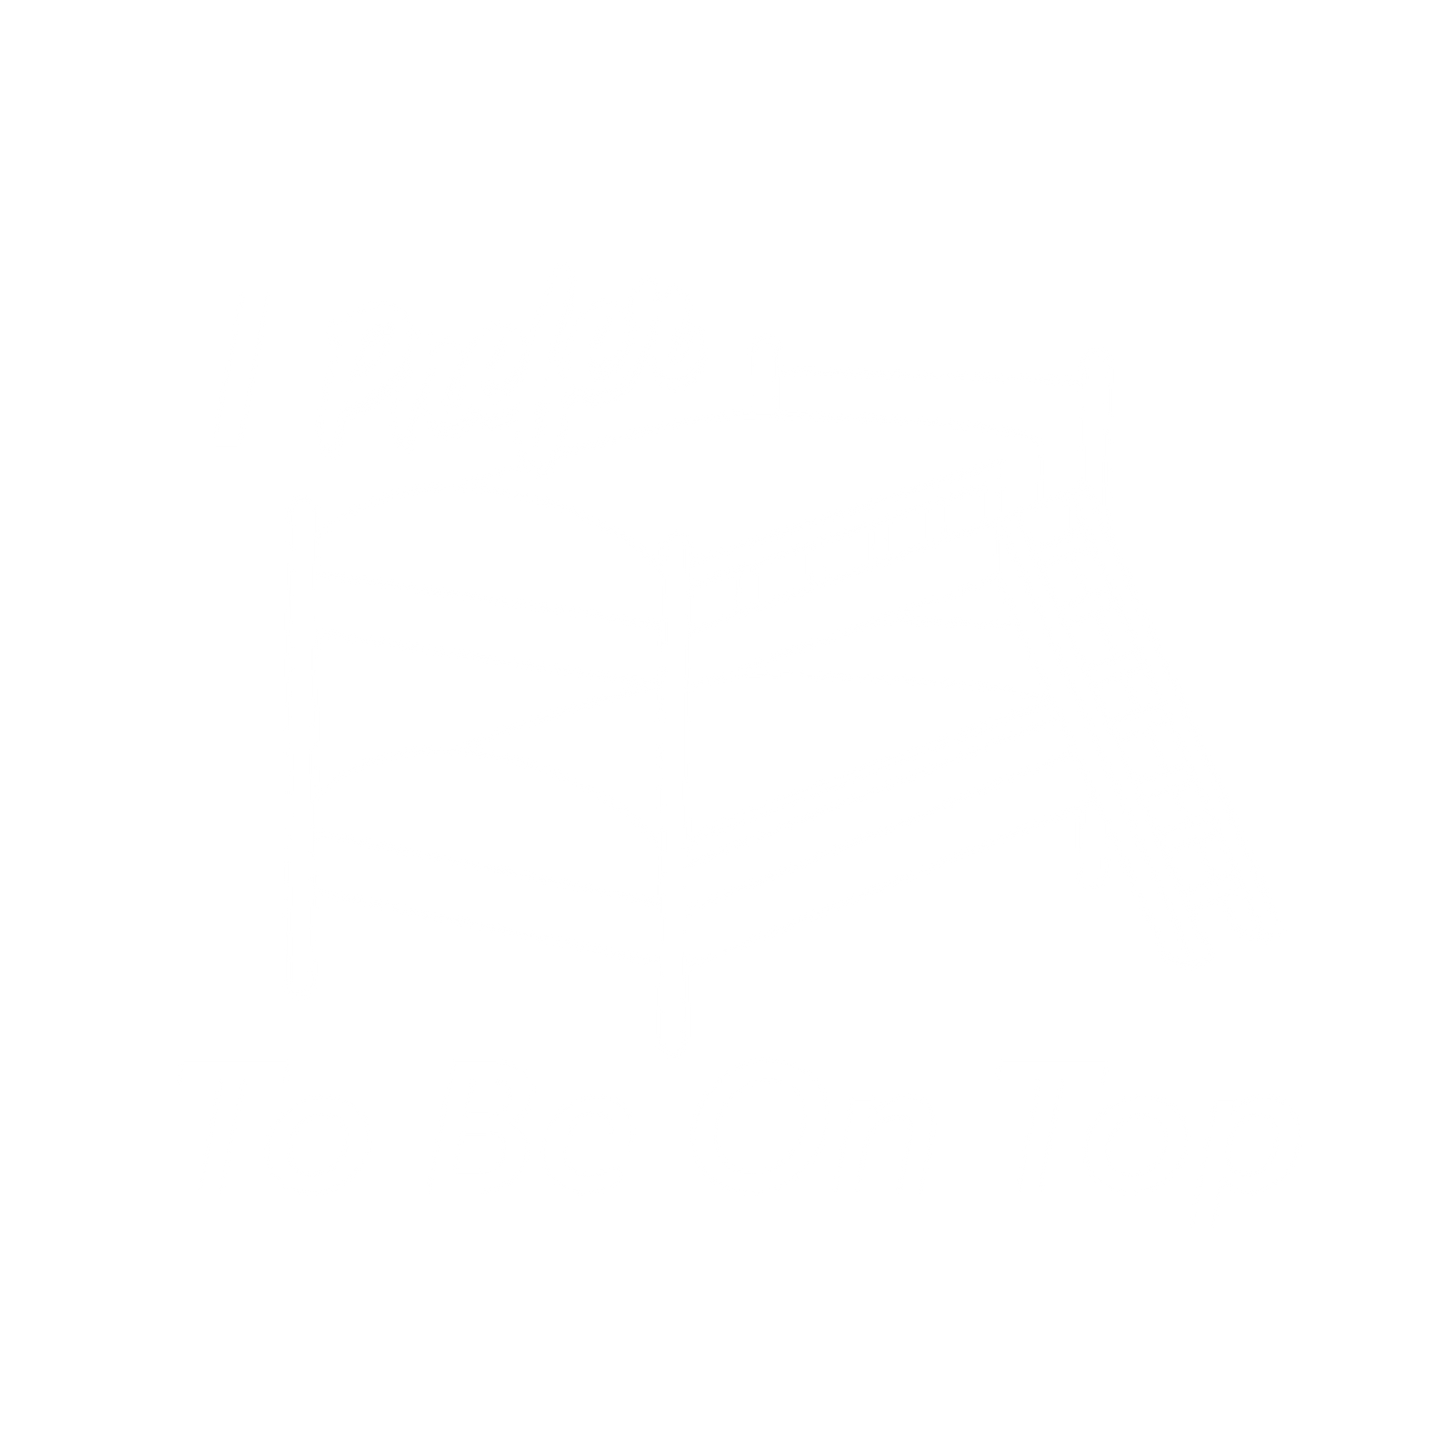 Funny T-Shirts design "I Perfer To Be On The Top"